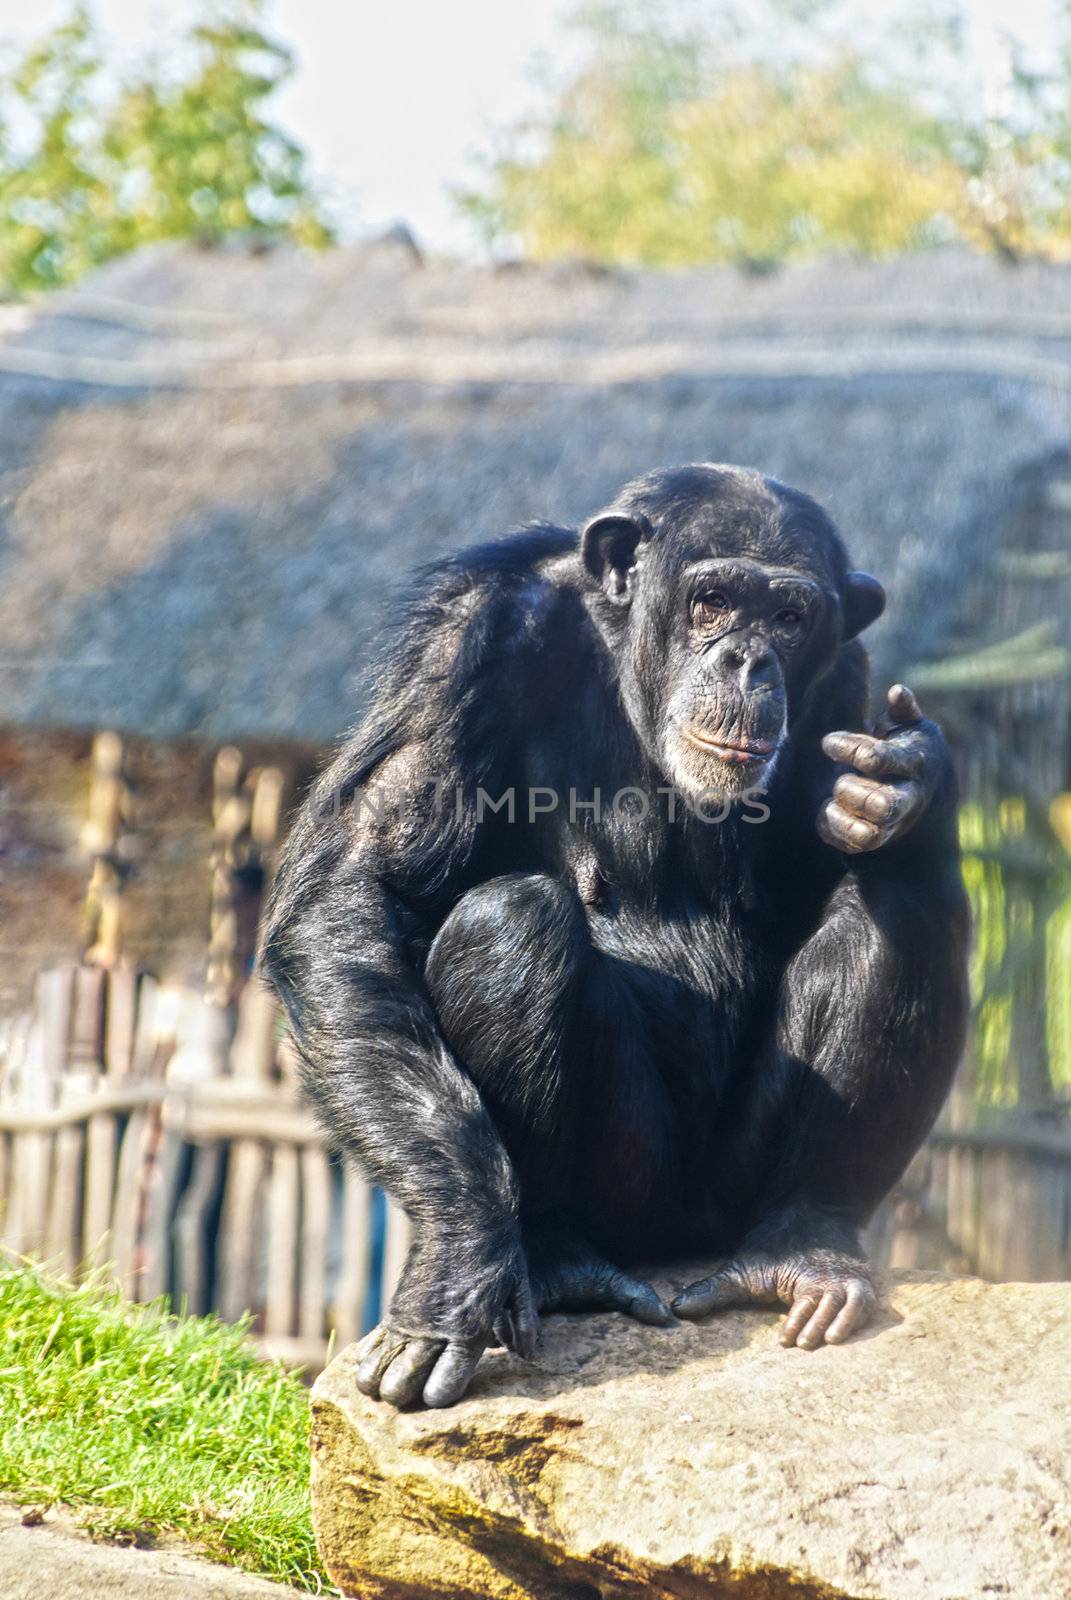 Common chimpanzee (Pan troglodytes), or robust chimpanzee, great ape sitting and looking into the camera